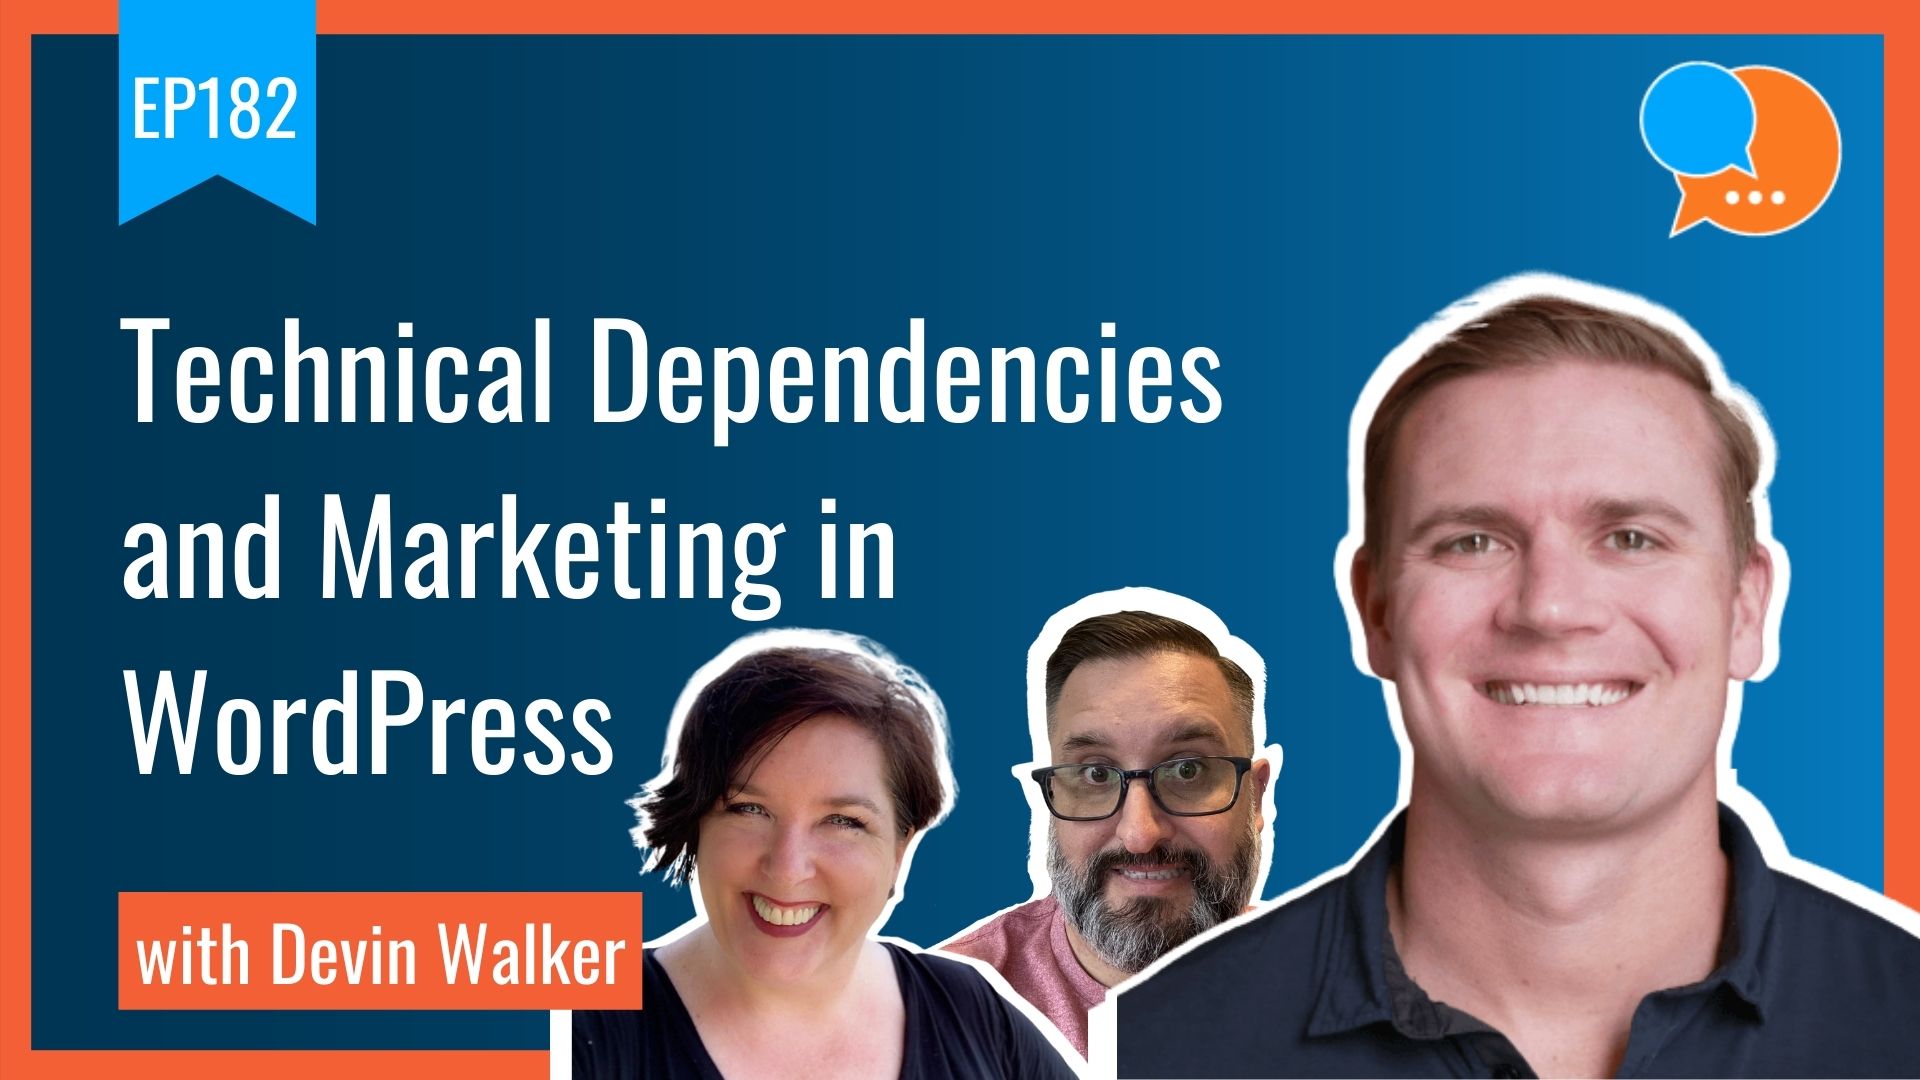 EP182 – Technical Dependencies and Marketing in WordPress with Devin Walker